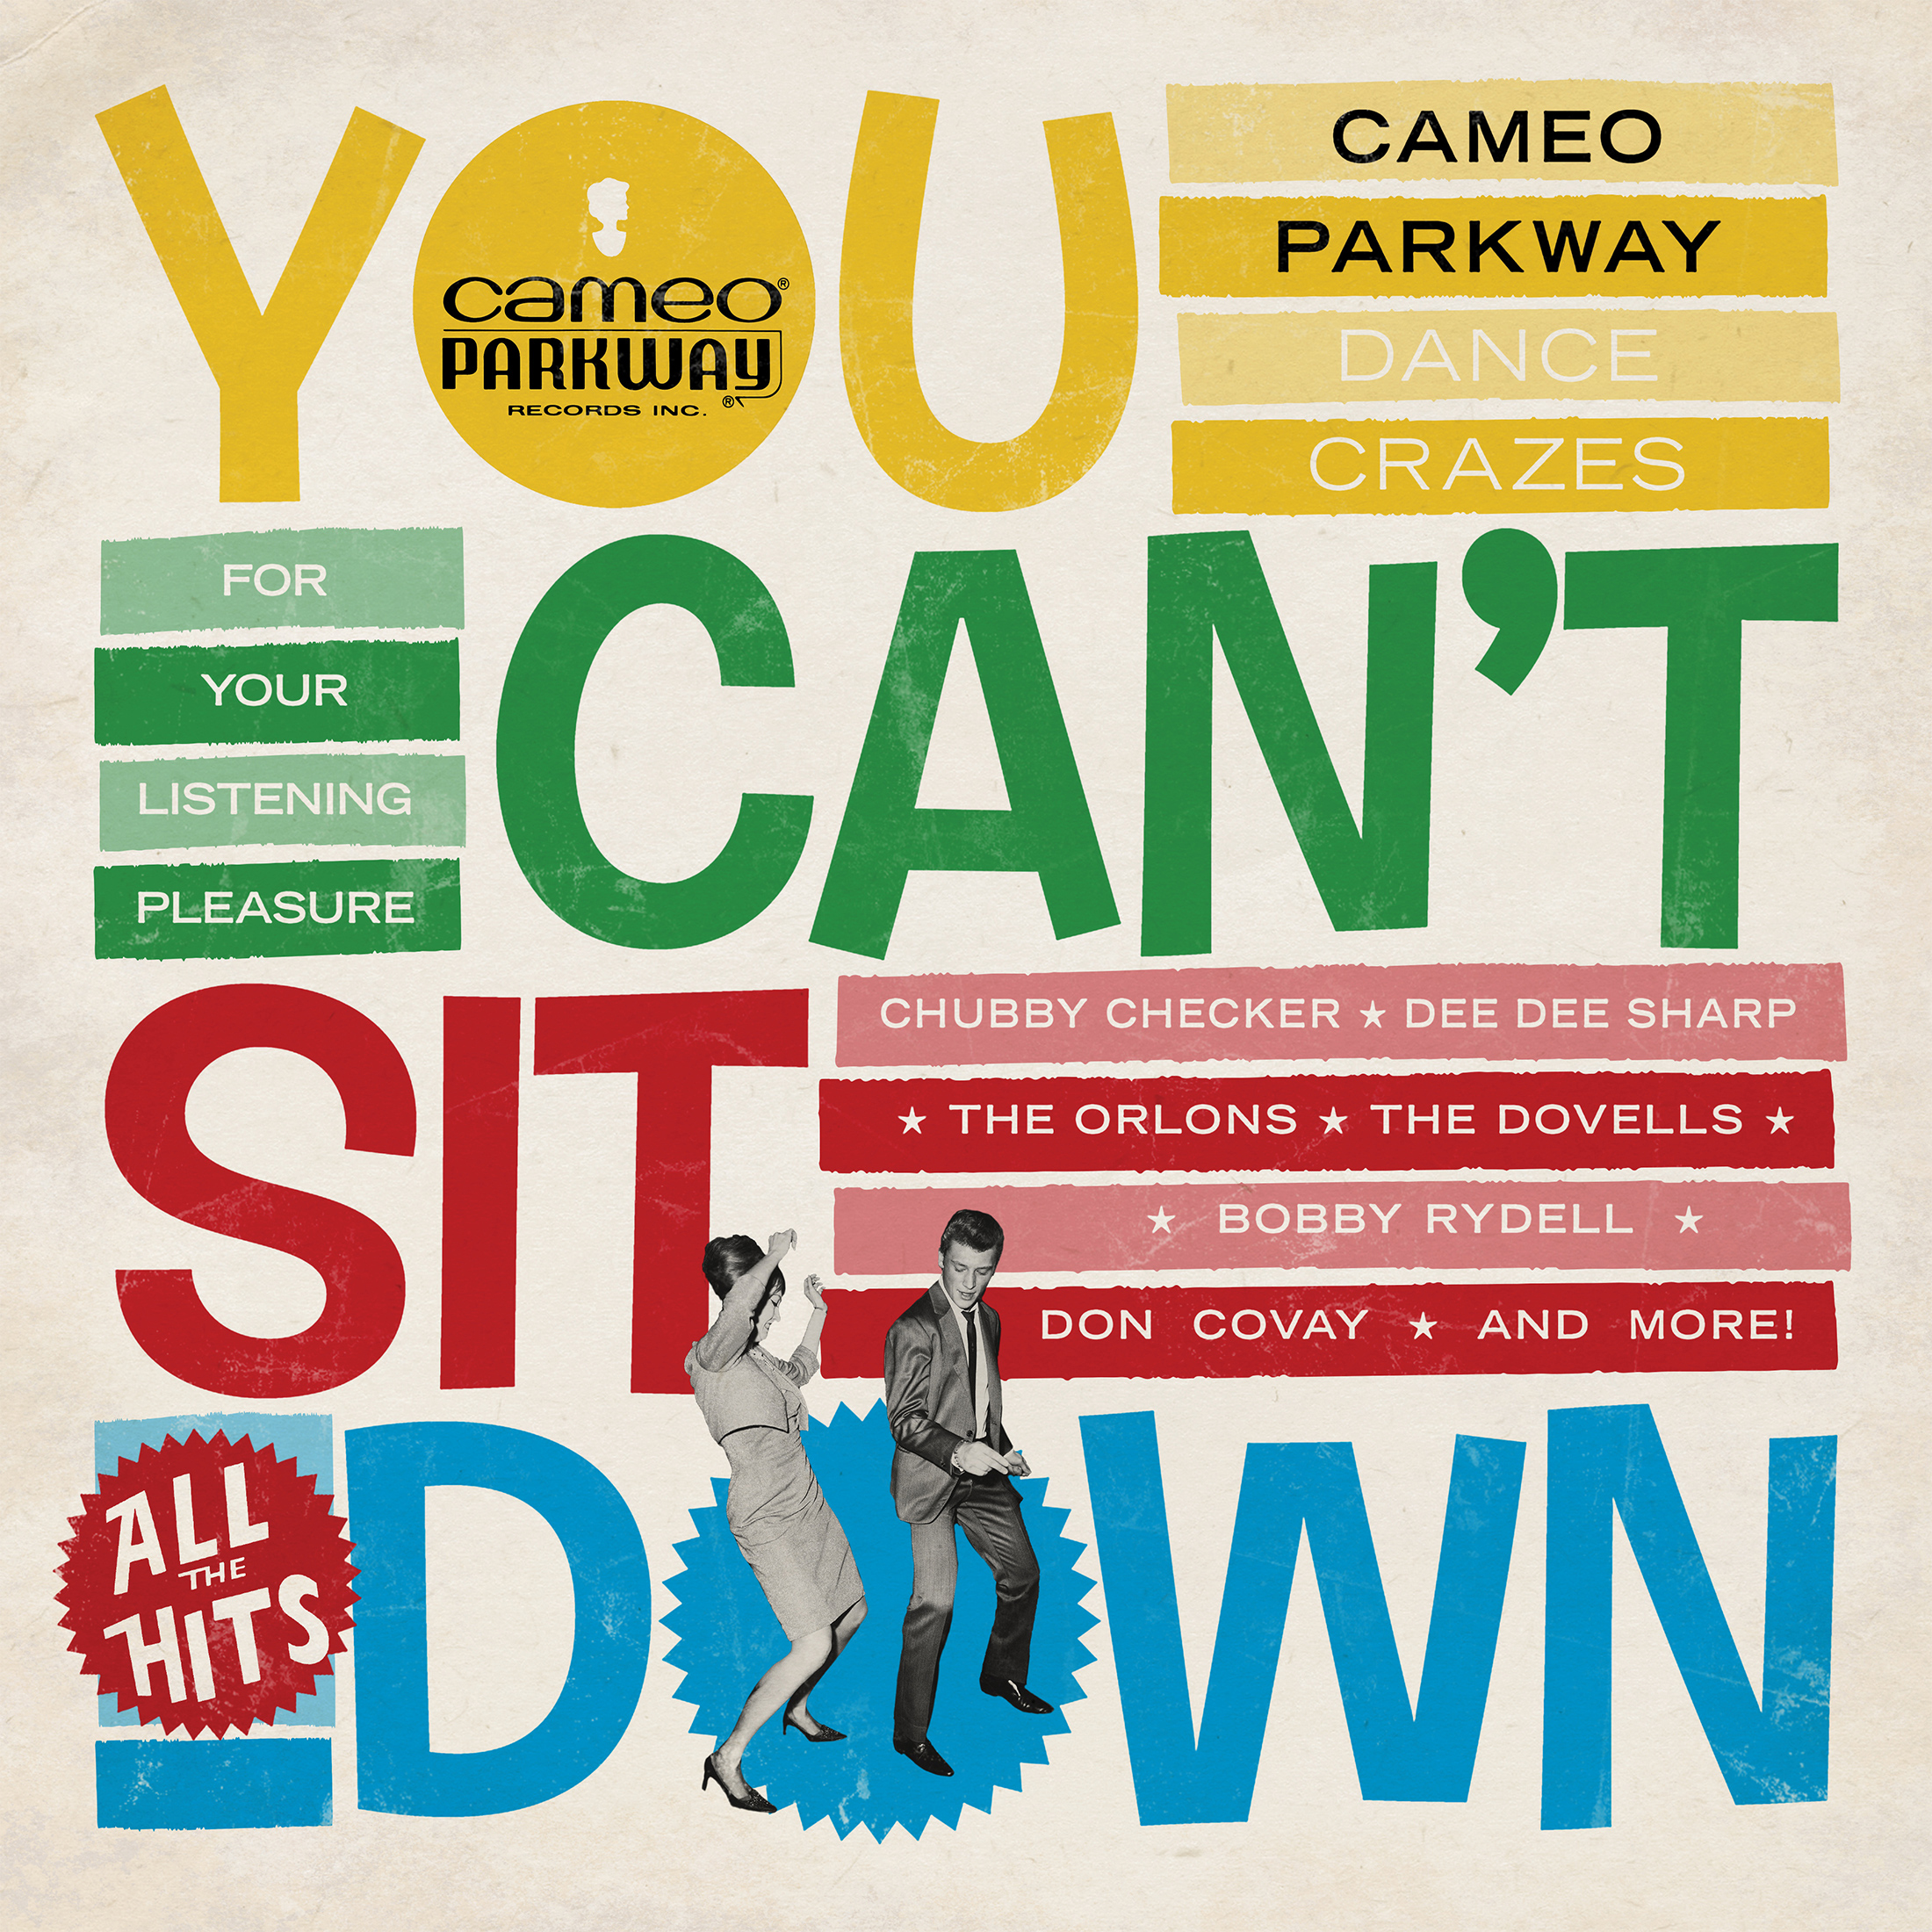 You Can't Sit Down: Cameo Parkway Dance Crazes